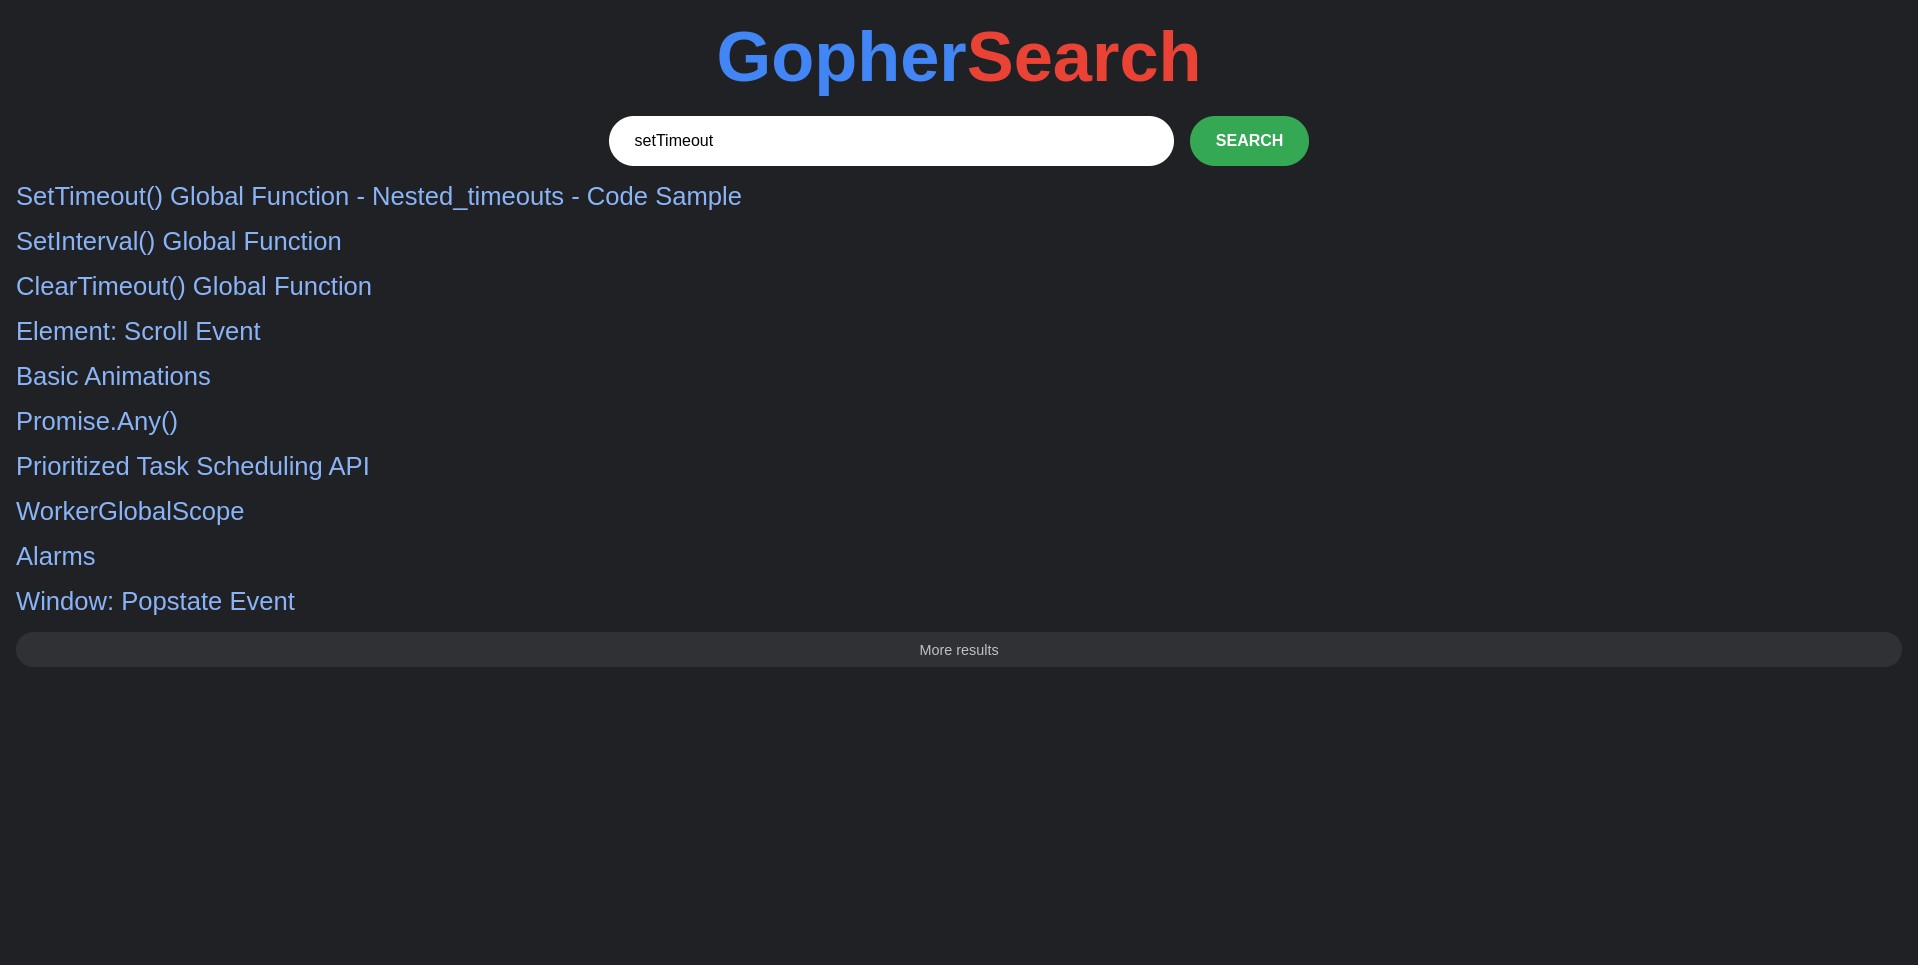 GopherSearch